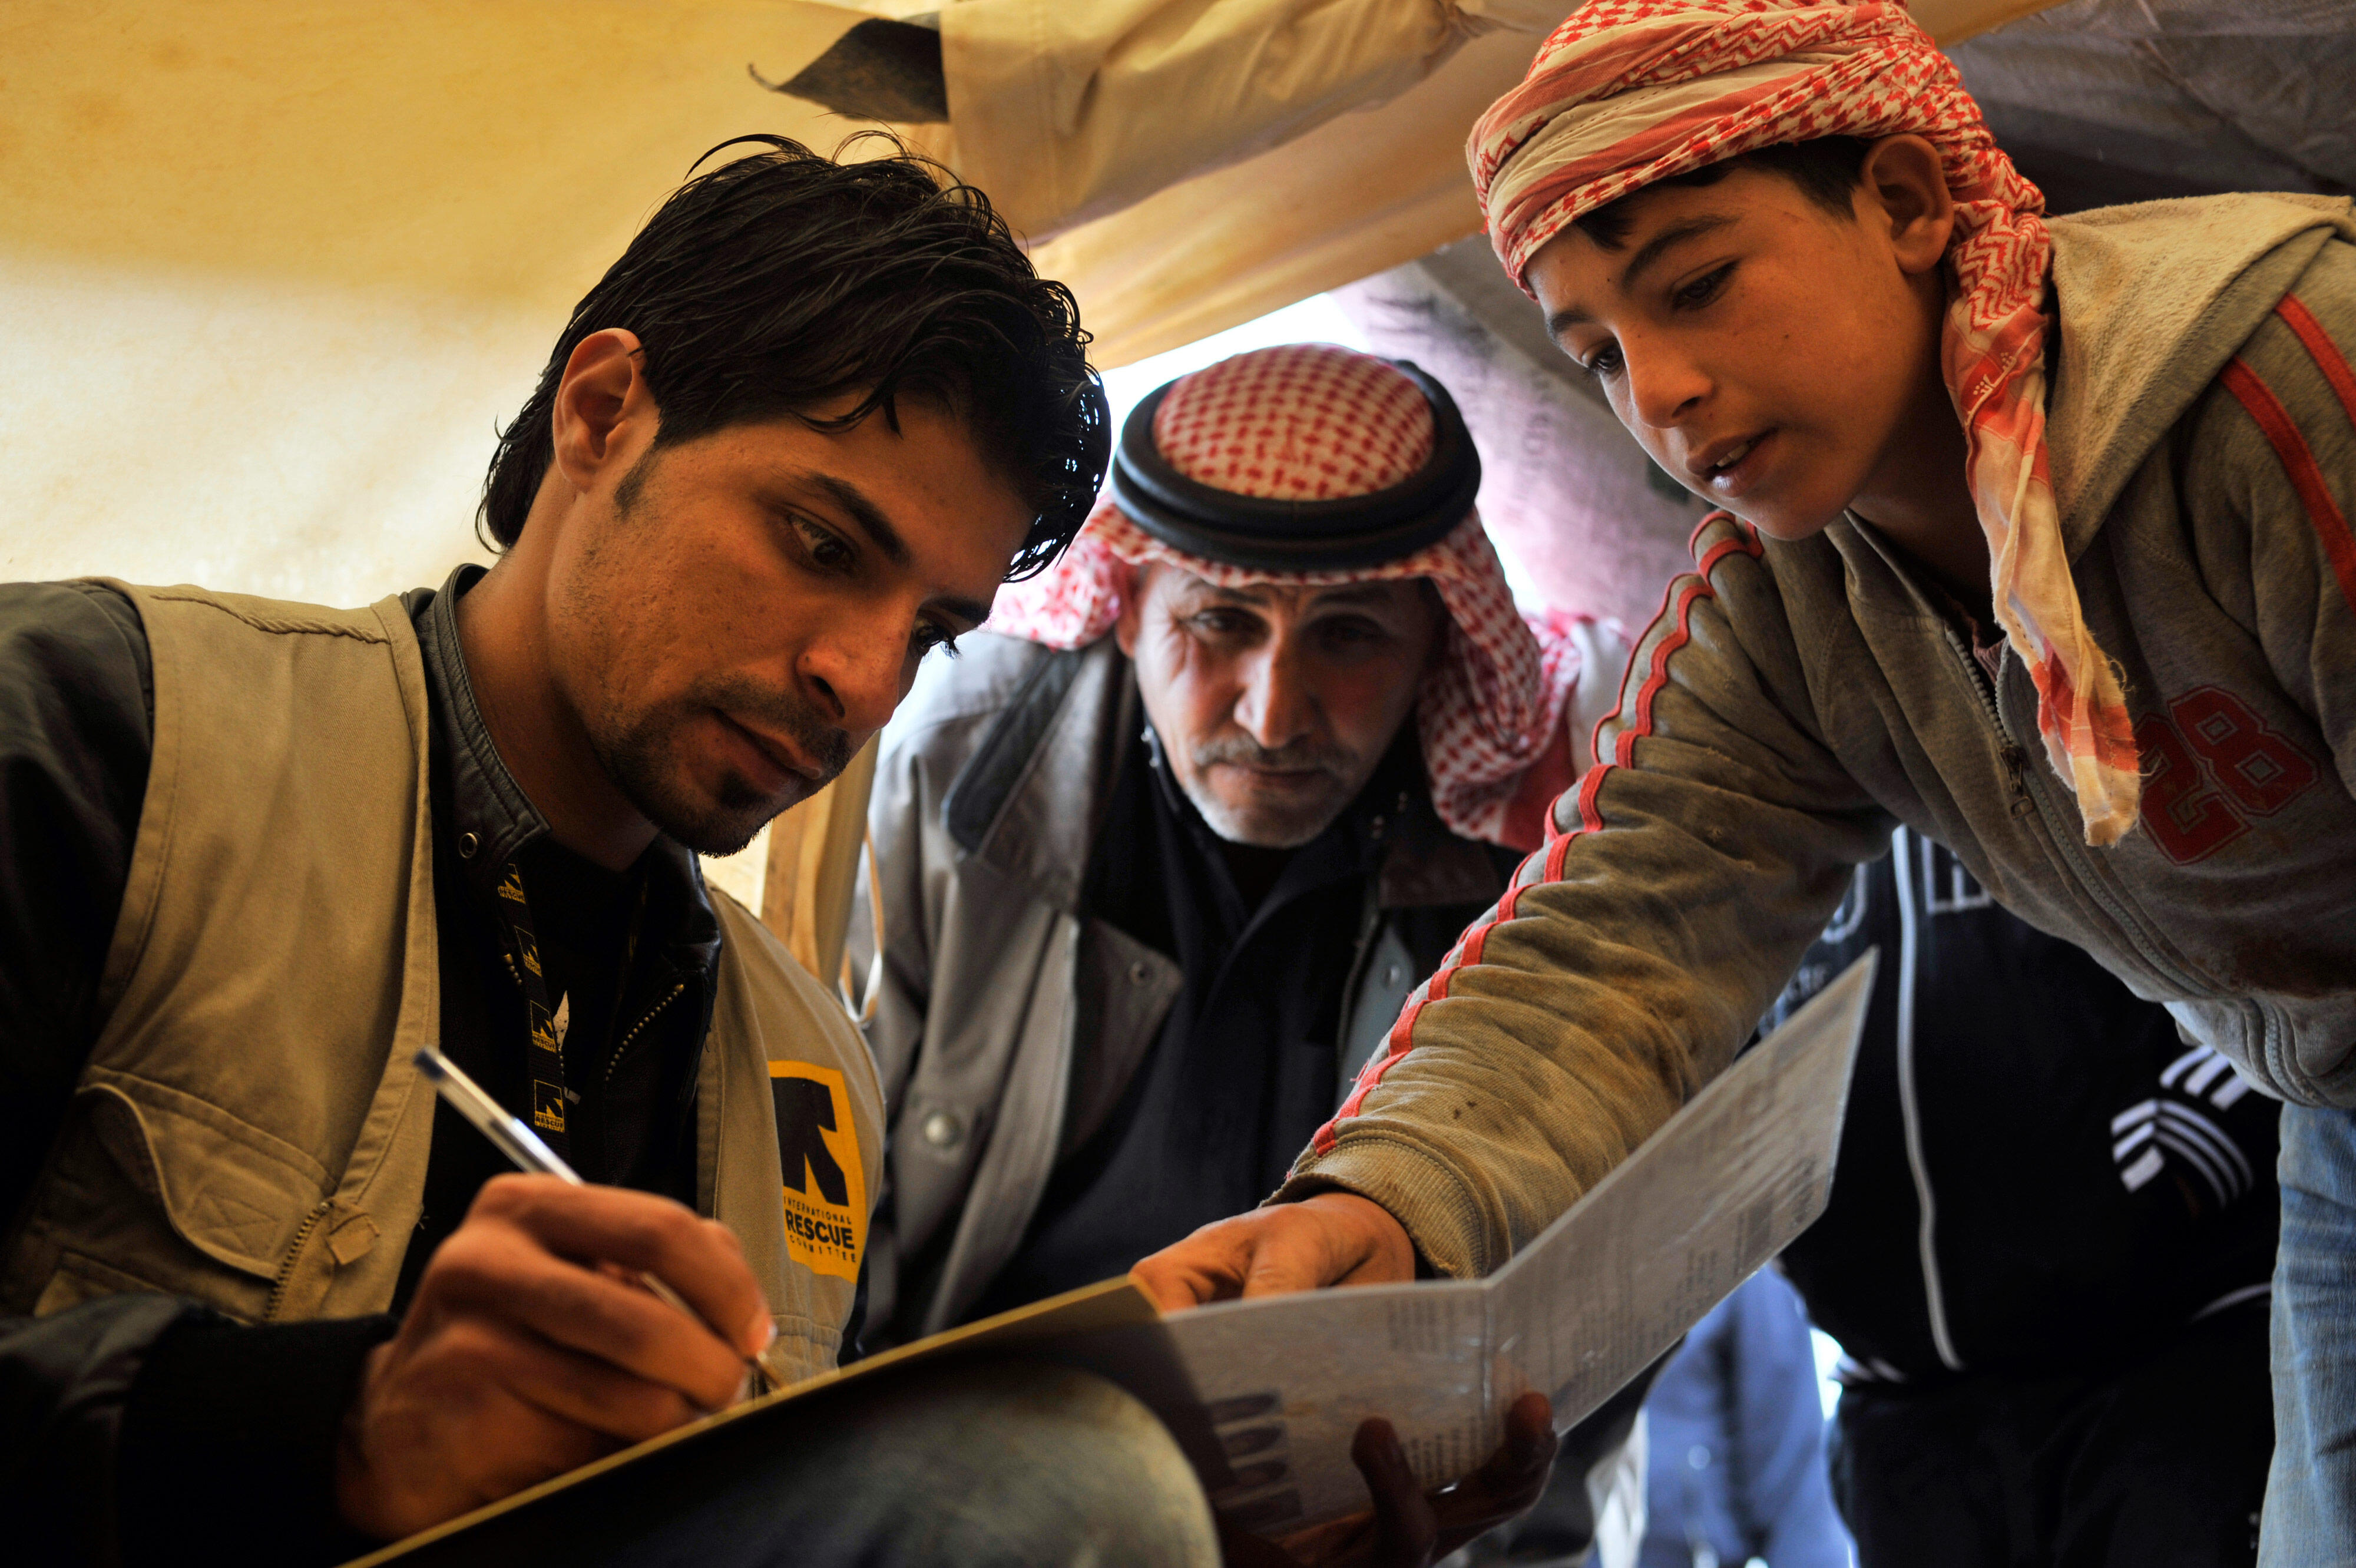 A volunteer from the International Rescue Committee holds a pen while two Syrian refugees point to an item on the page the volunteer is writing on.